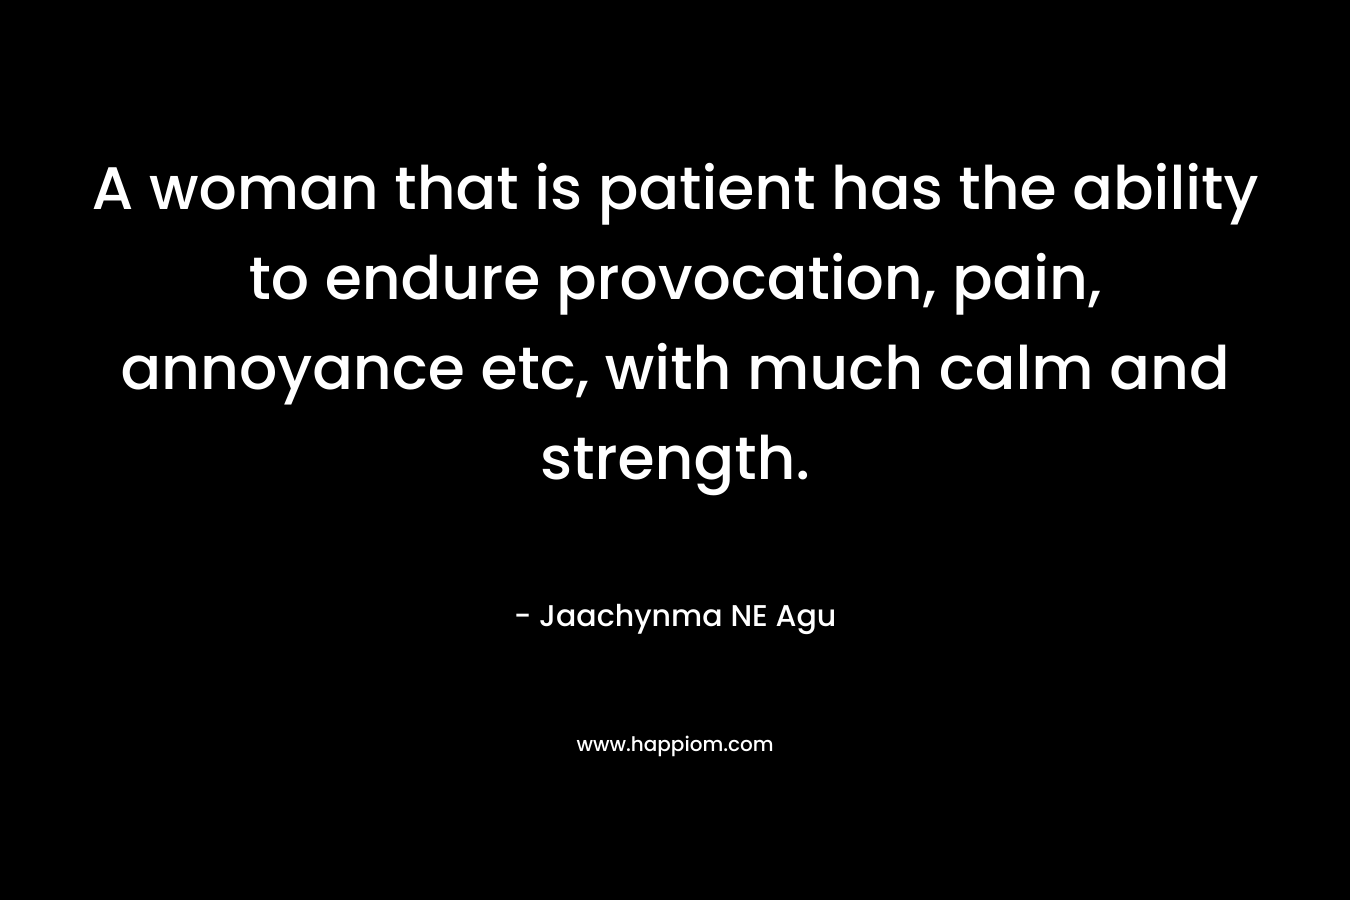 A woman that is patient has the ability to endure provocation, pain, annoyance etc, with much calm and strength. – Jaachynma NE Agu